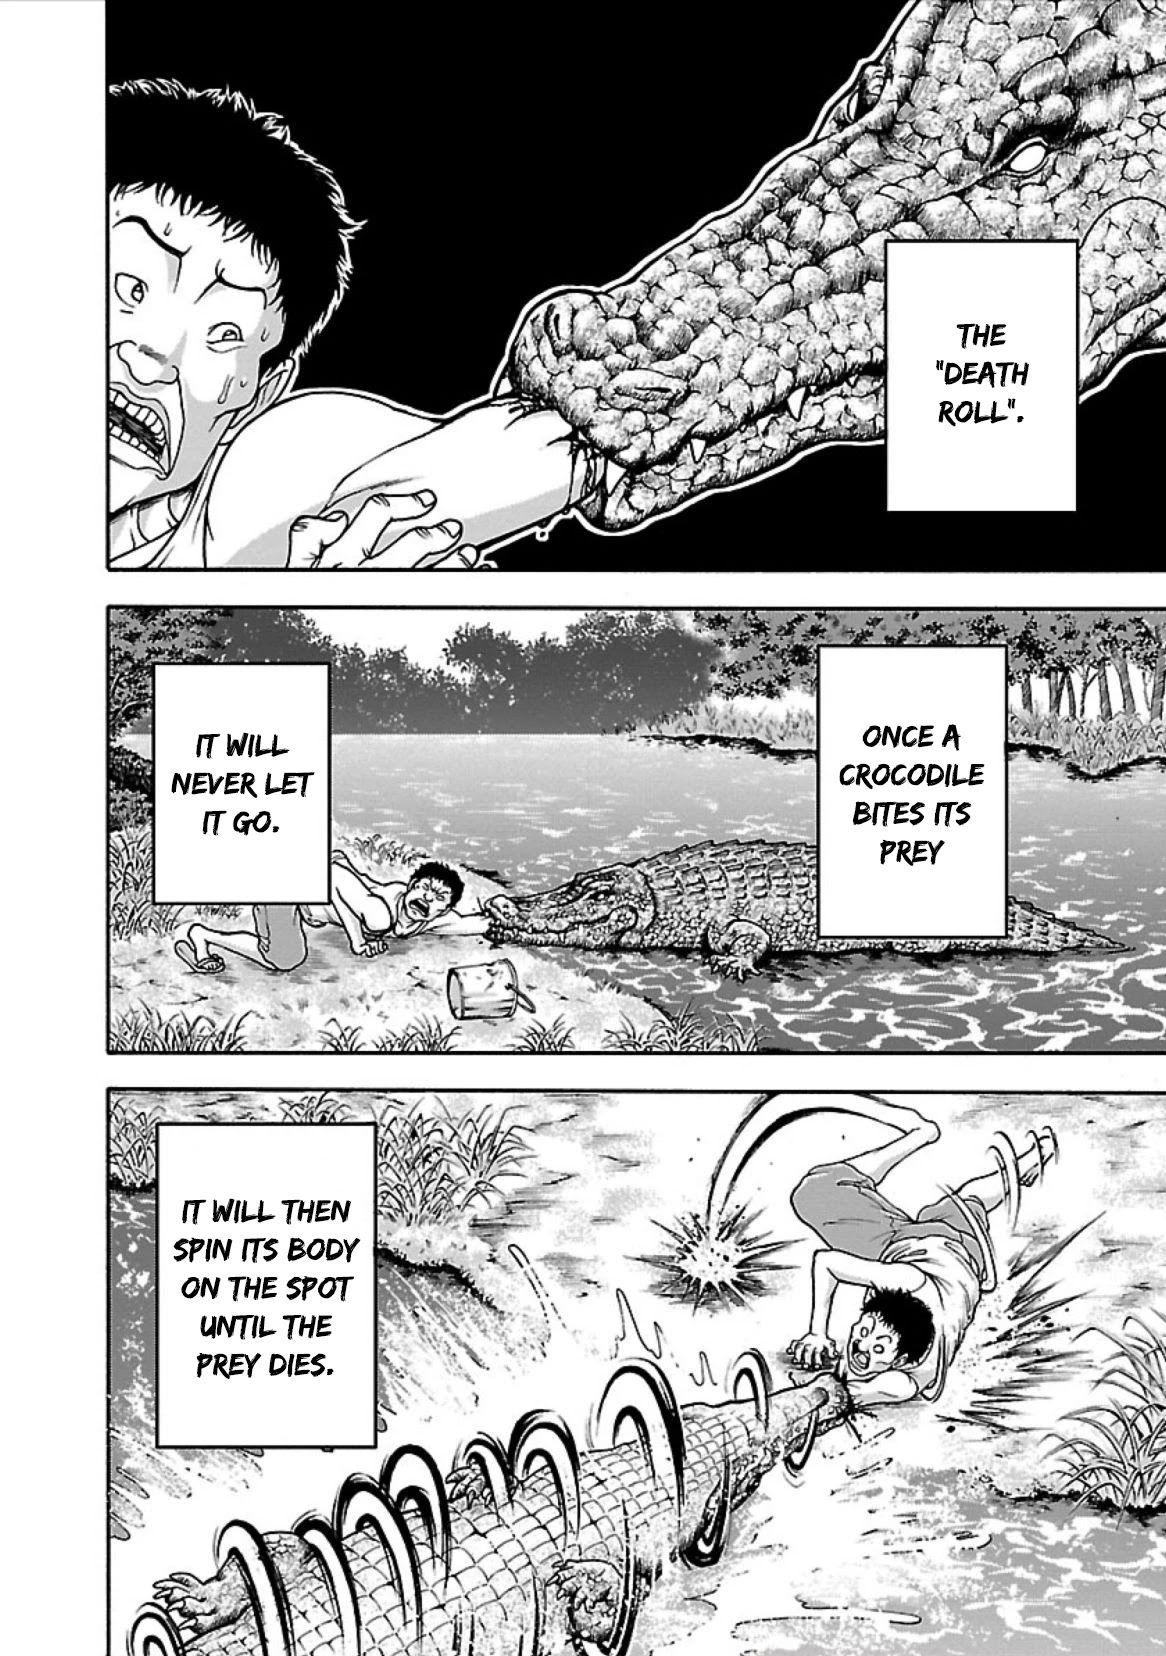 Baki Side Story - Retsu Kaioh Doesn't Mind Even If It's In Another World - Page 2